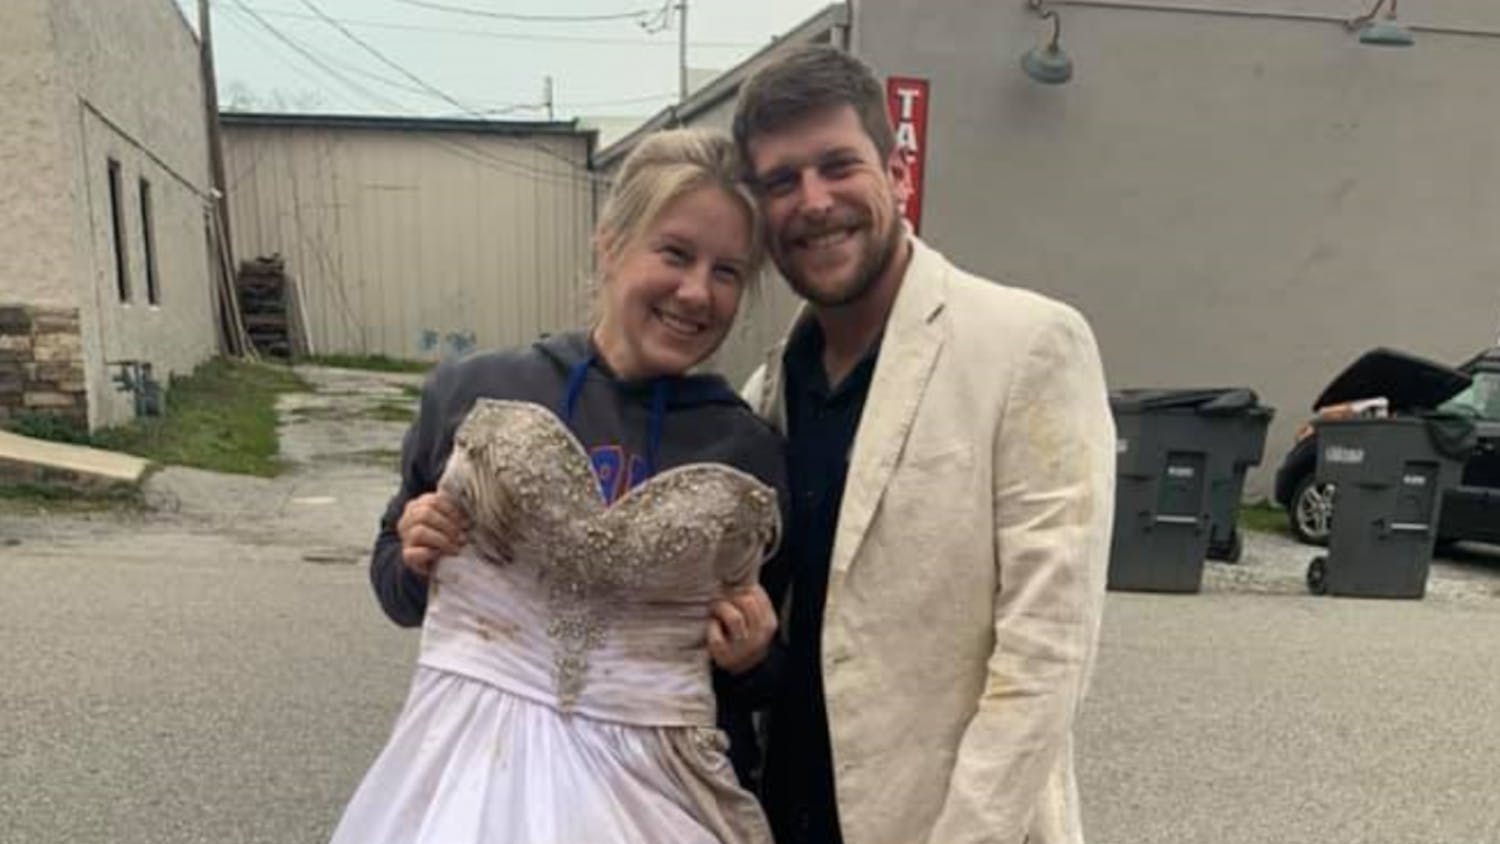 Lauren Hampton Farmer, 31, holds her wedding dress that was found after tornadoes in Cookeville, Tennessee destroyed her house and spread out her belongings in early March. Her husband, Kory Farmer, is wearing his wedding blazer that was also found in the aftermath, alongside her UF diploma. She graduated from UF in 2010.